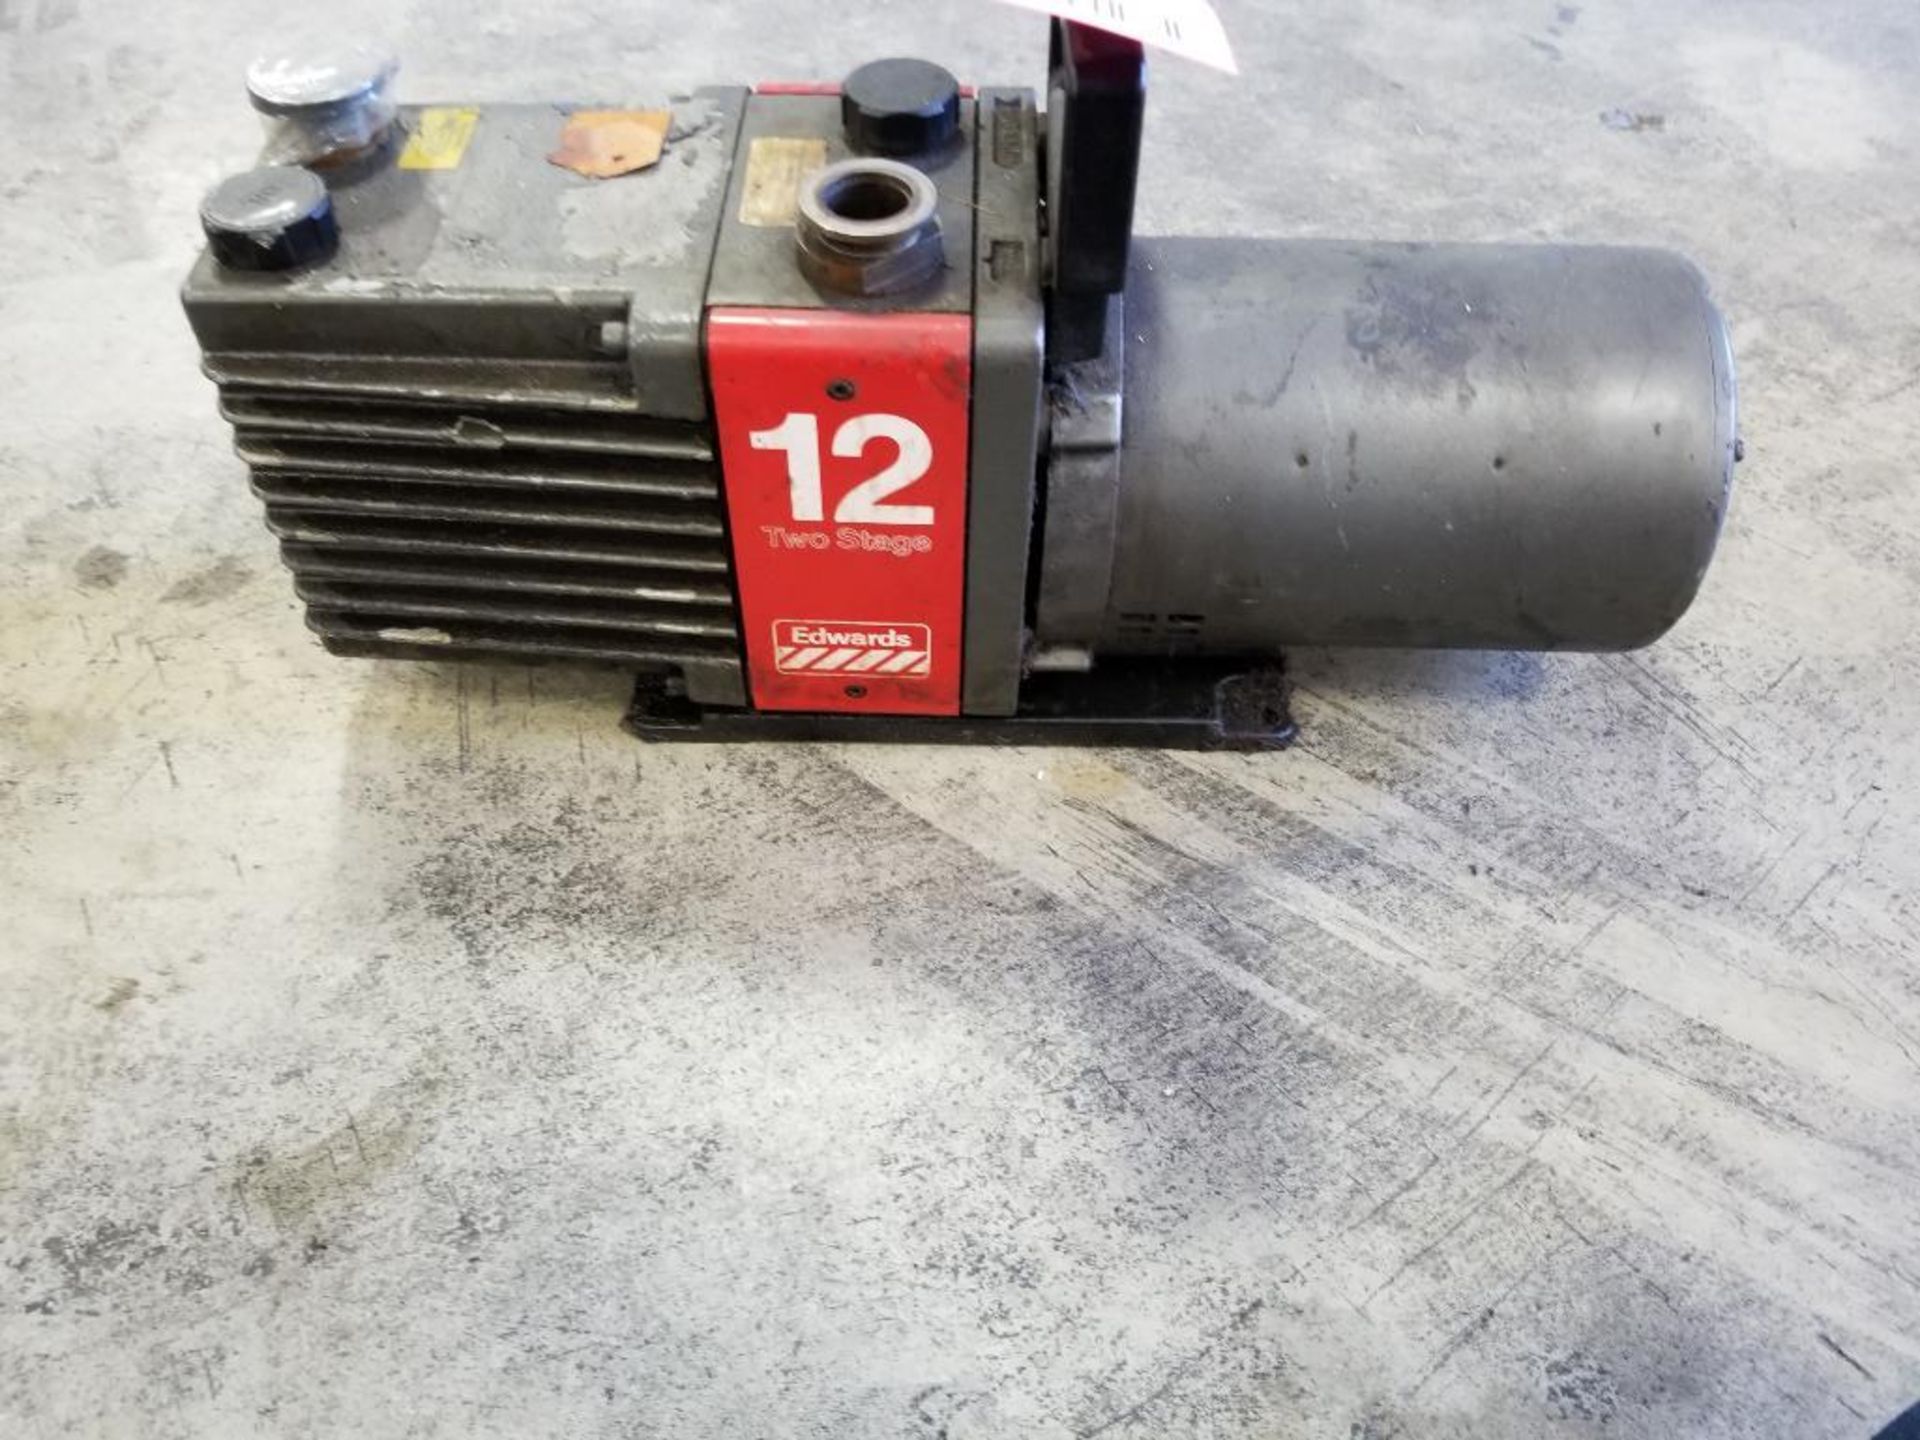 Edwards 12 two stage high vacuum pump. Model E2M12. 3/4hp 3 phase.